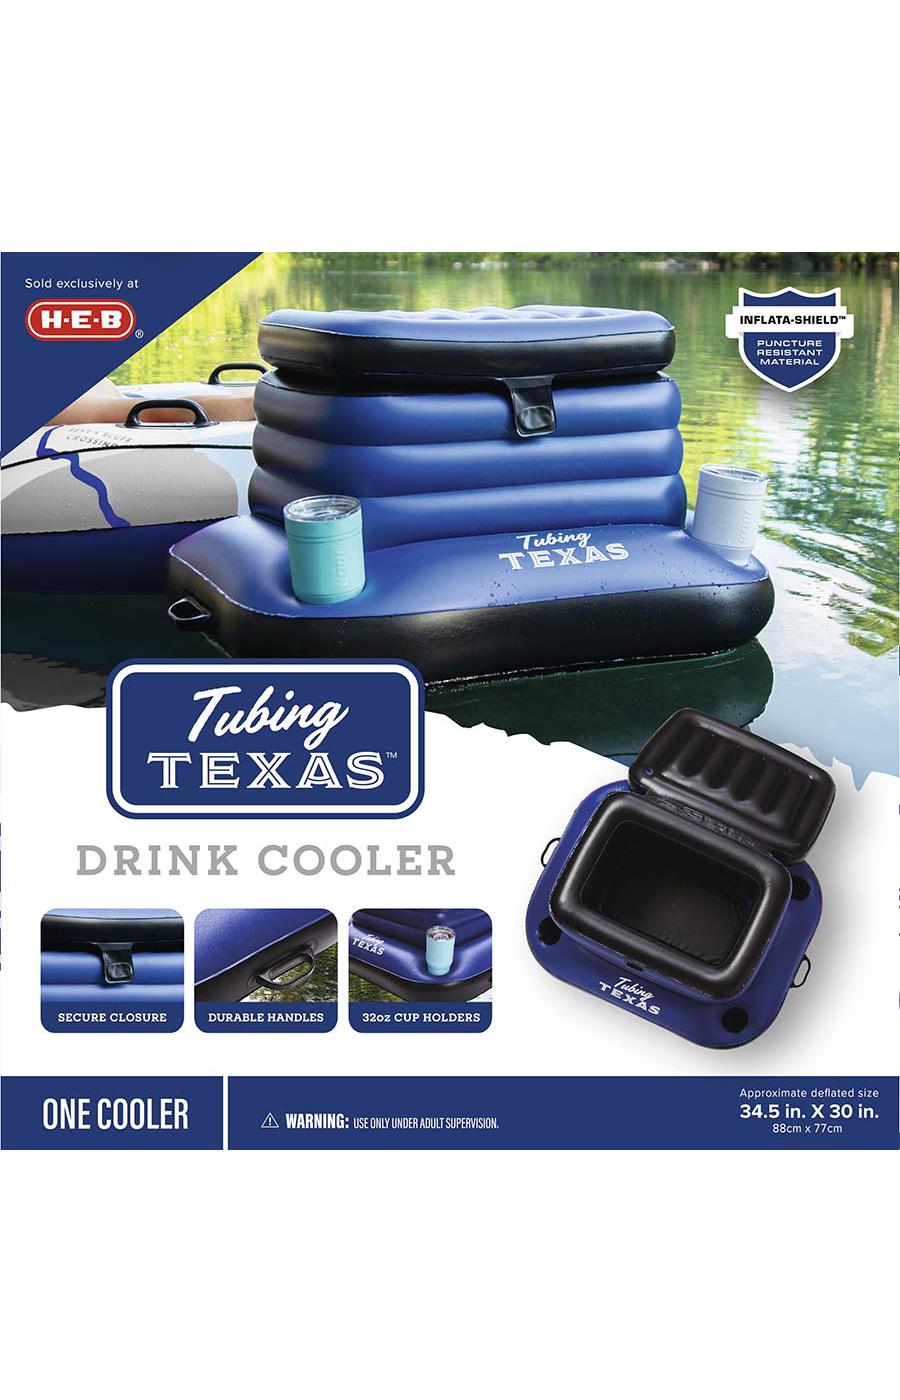 H-E-B Tubing Texas Inflatable Cooler; image 1 of 2